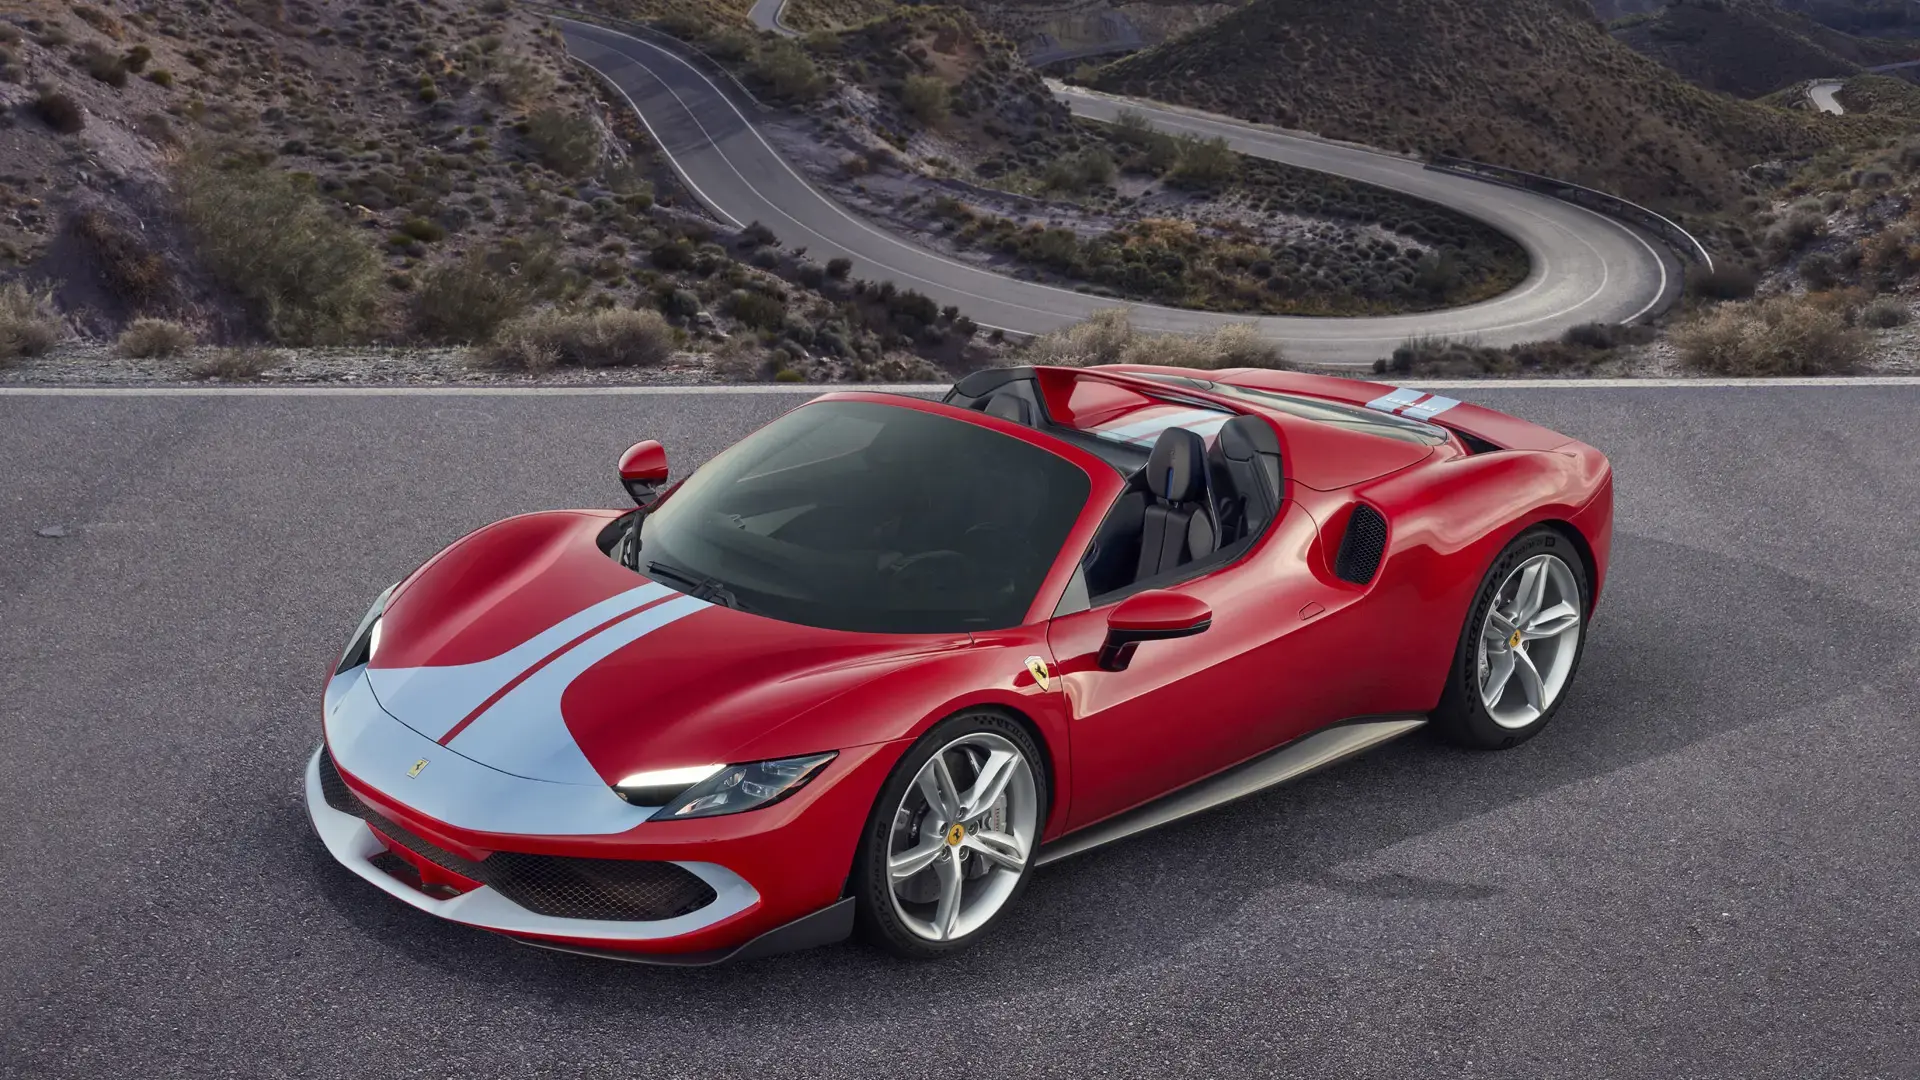 Ferrari announces collaboration with sk on cutting edge battery technology 1